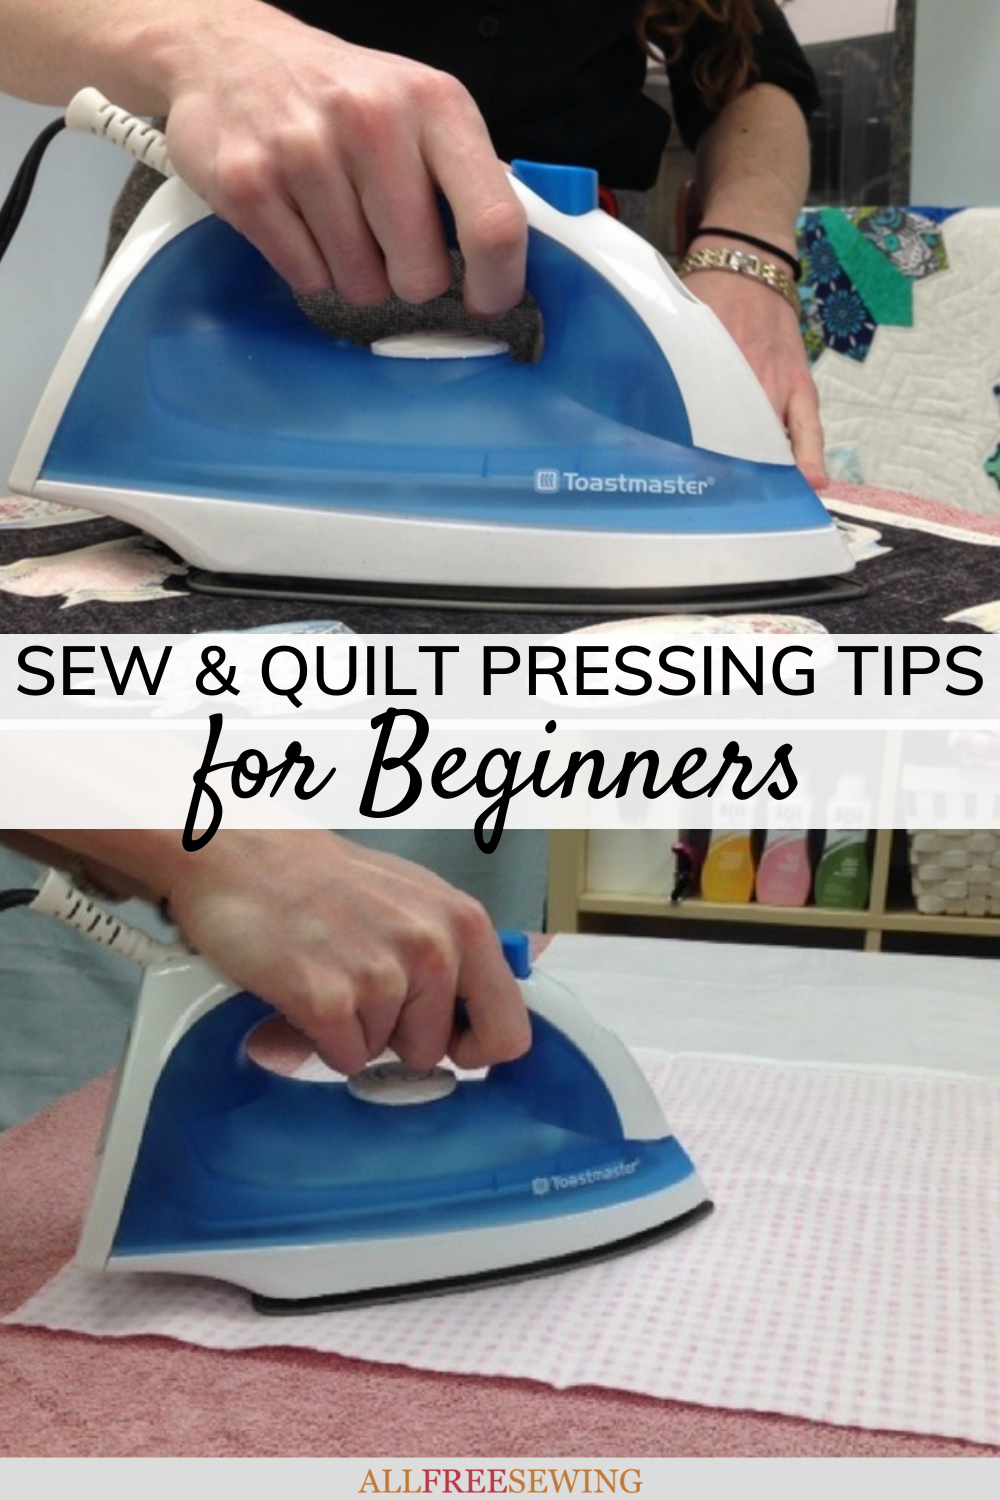 How to Iron Fabric for Sewing - Threads